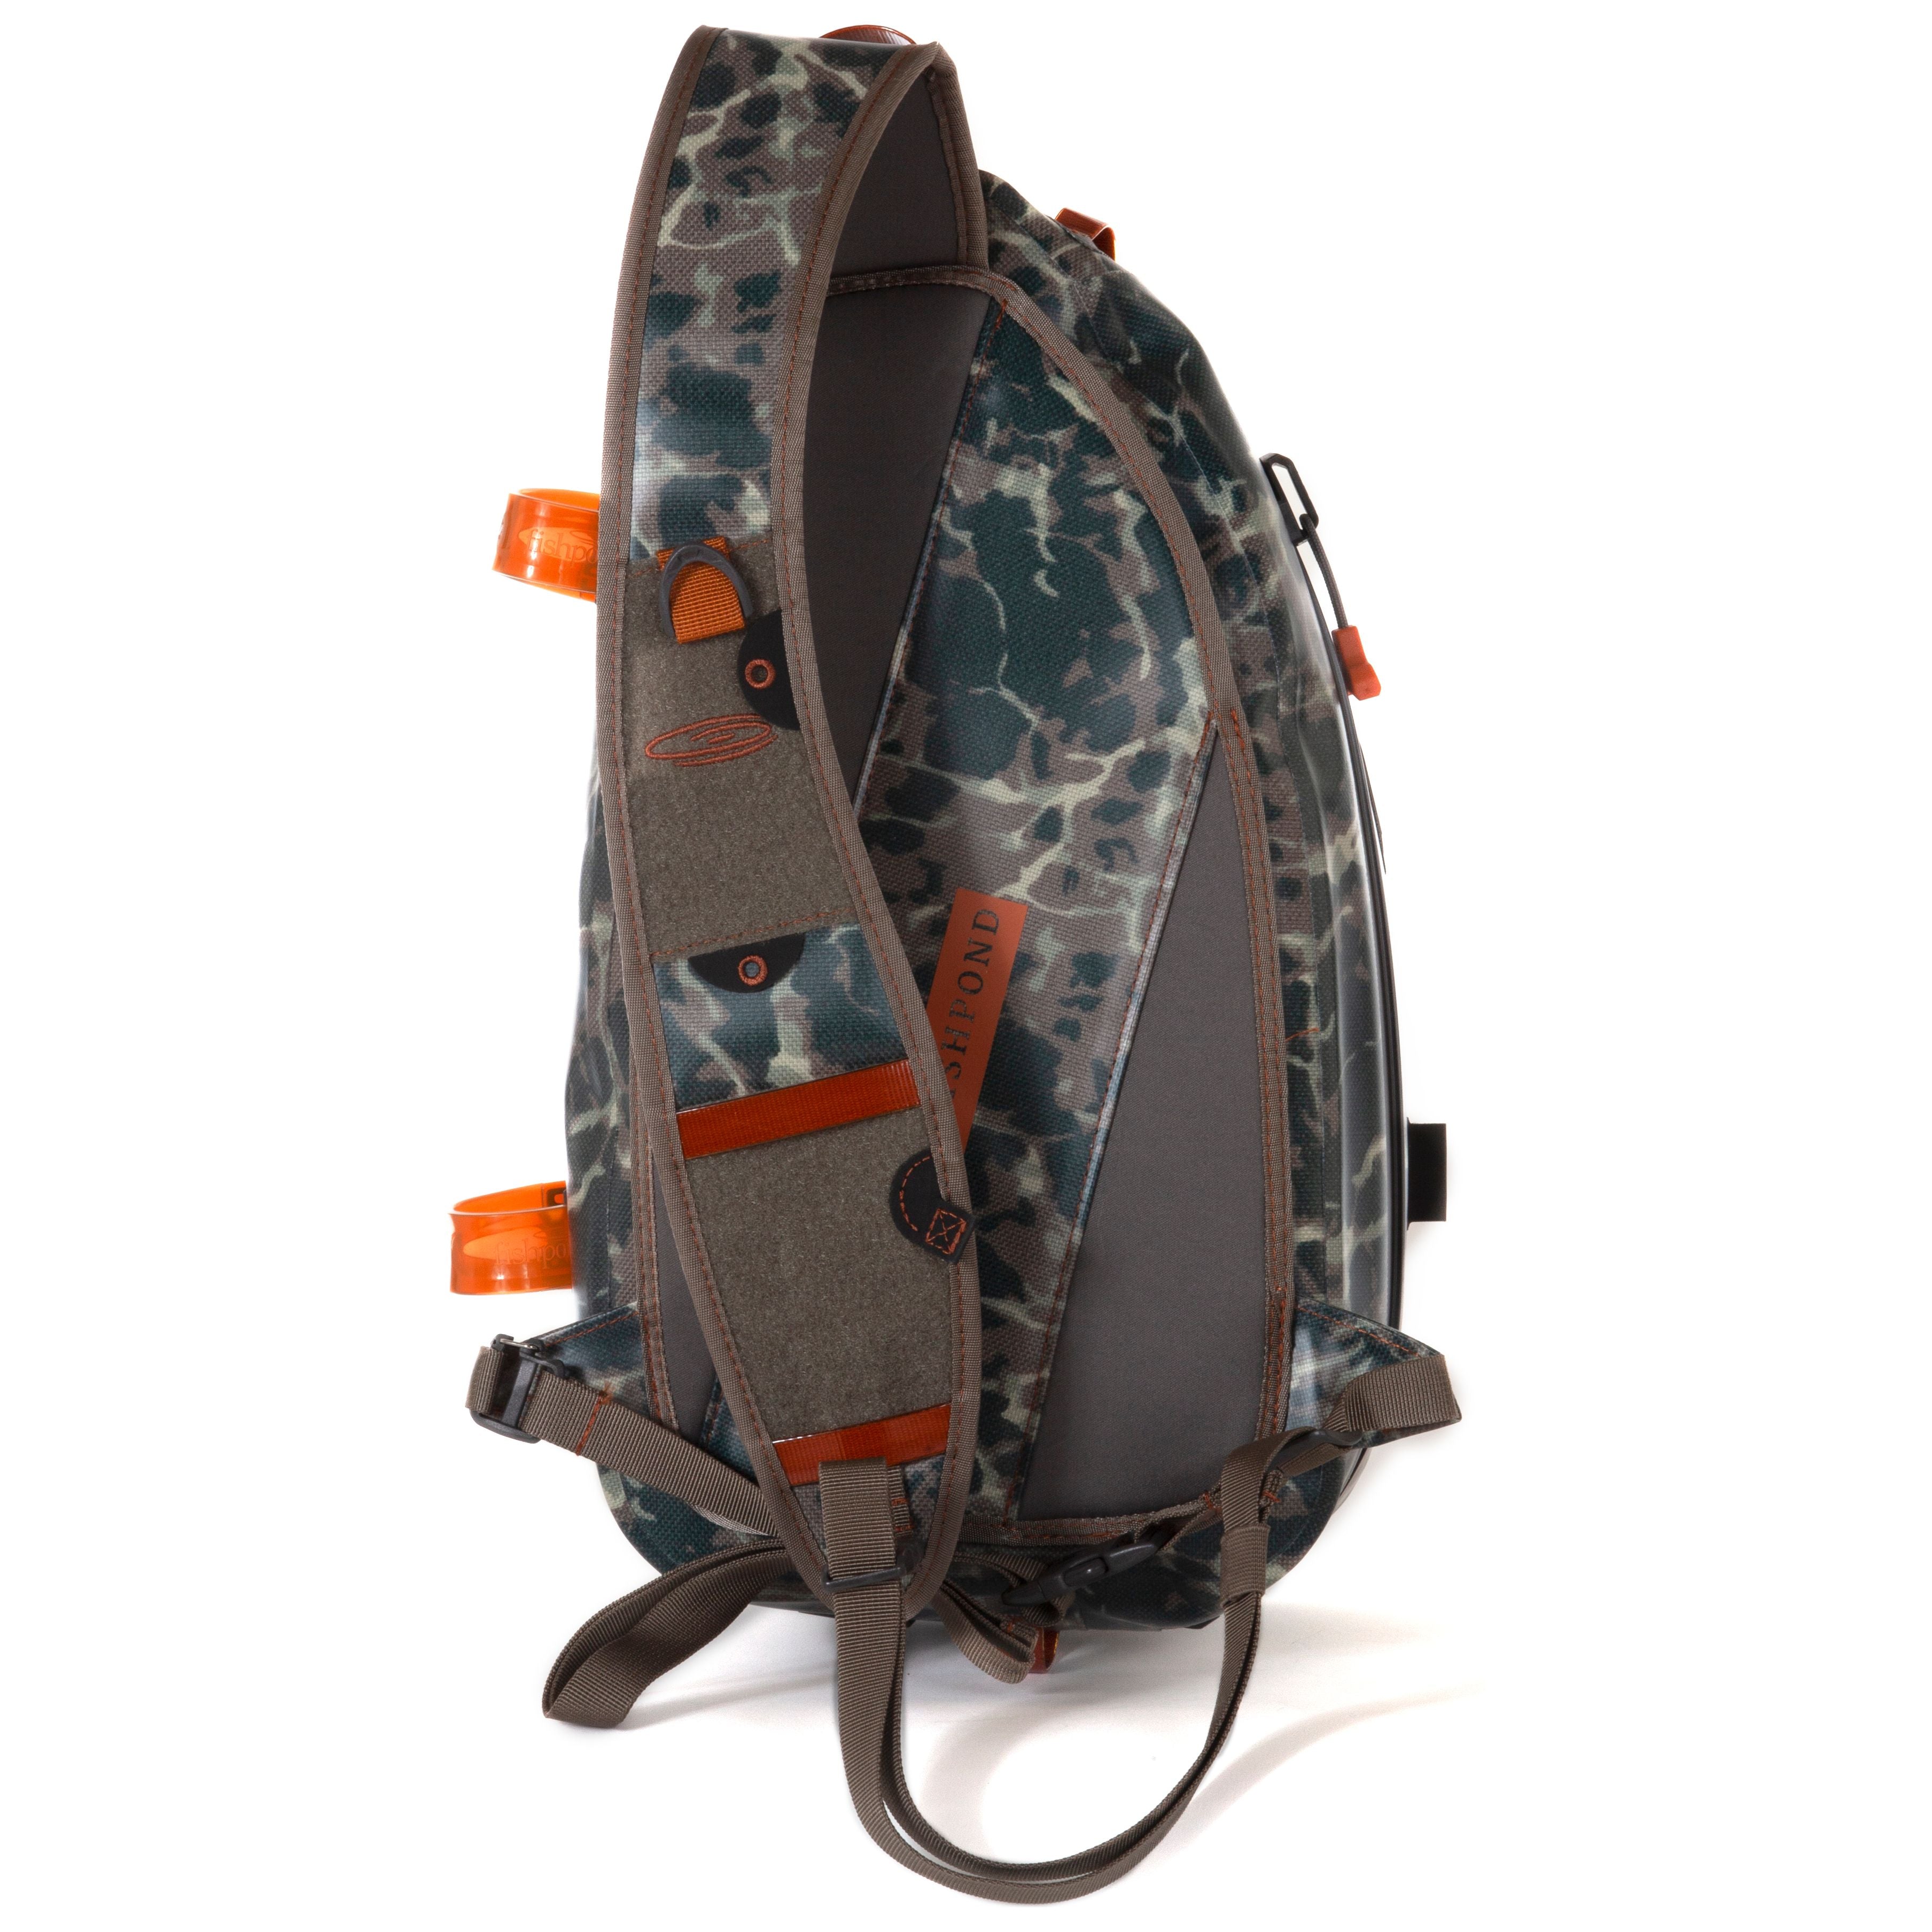 Fishpond Thunderhead Submersible Sling Eco Riverbed Camo Image 02